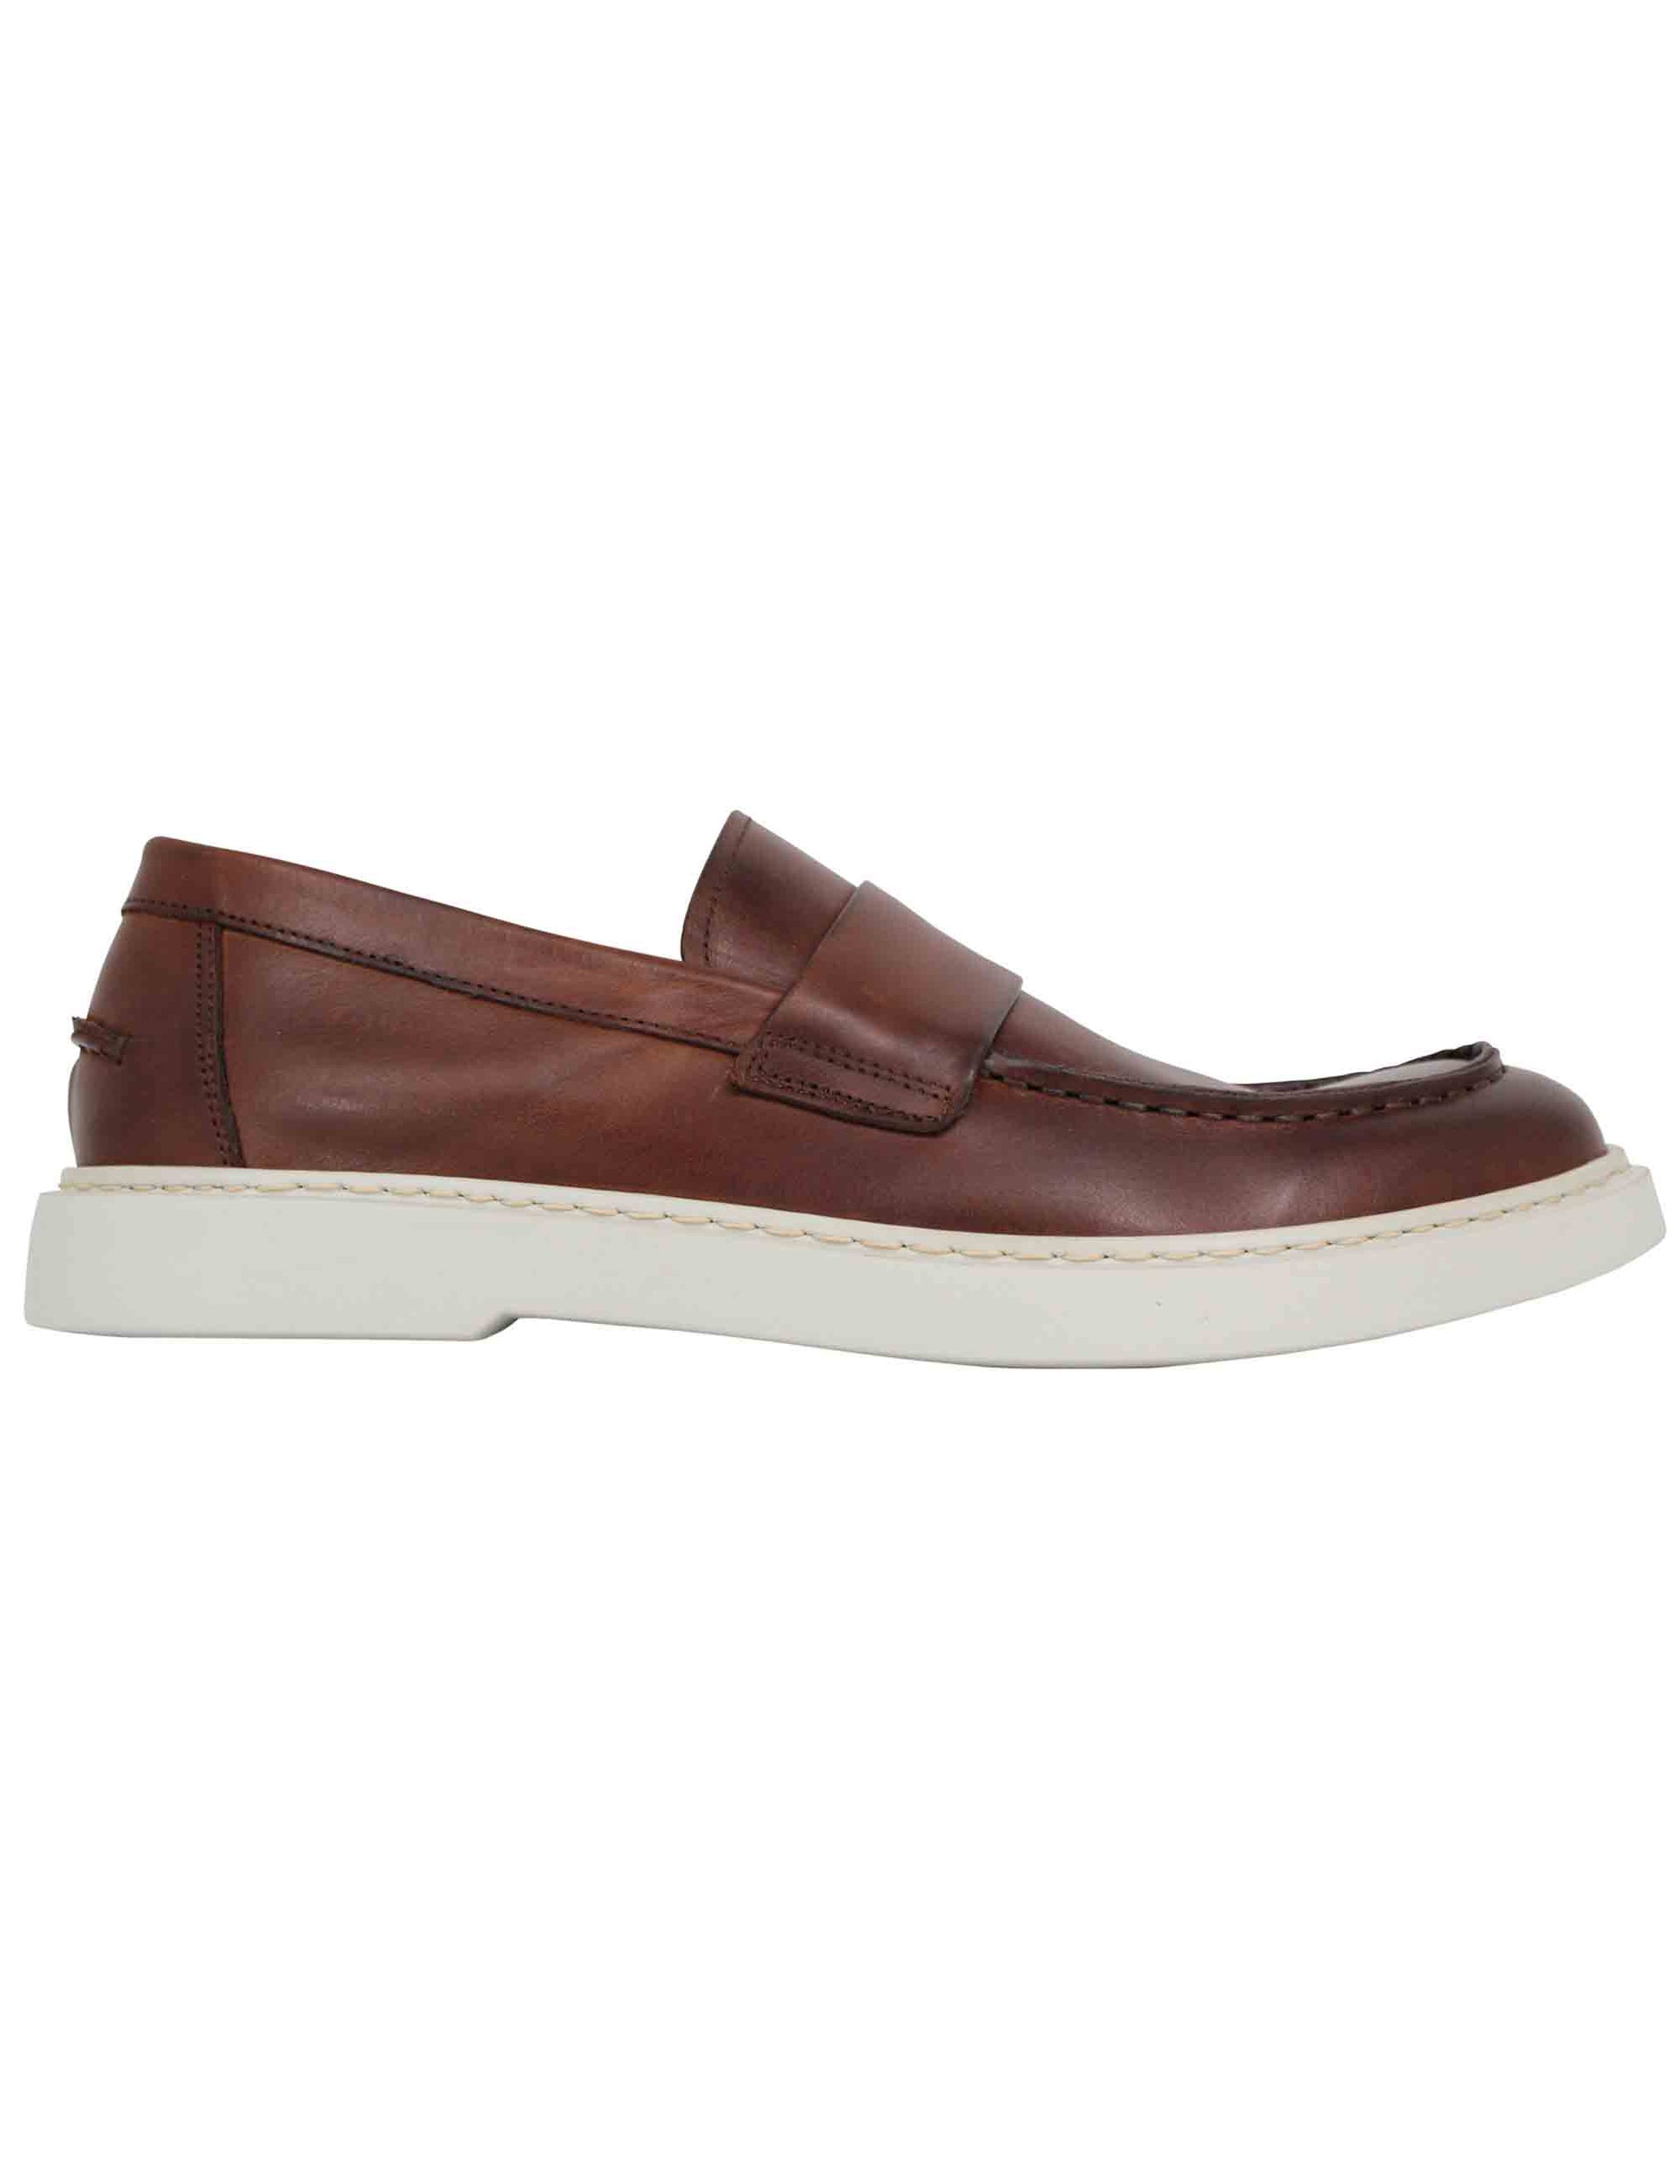 Men's brown leather loafers with white rubber sole